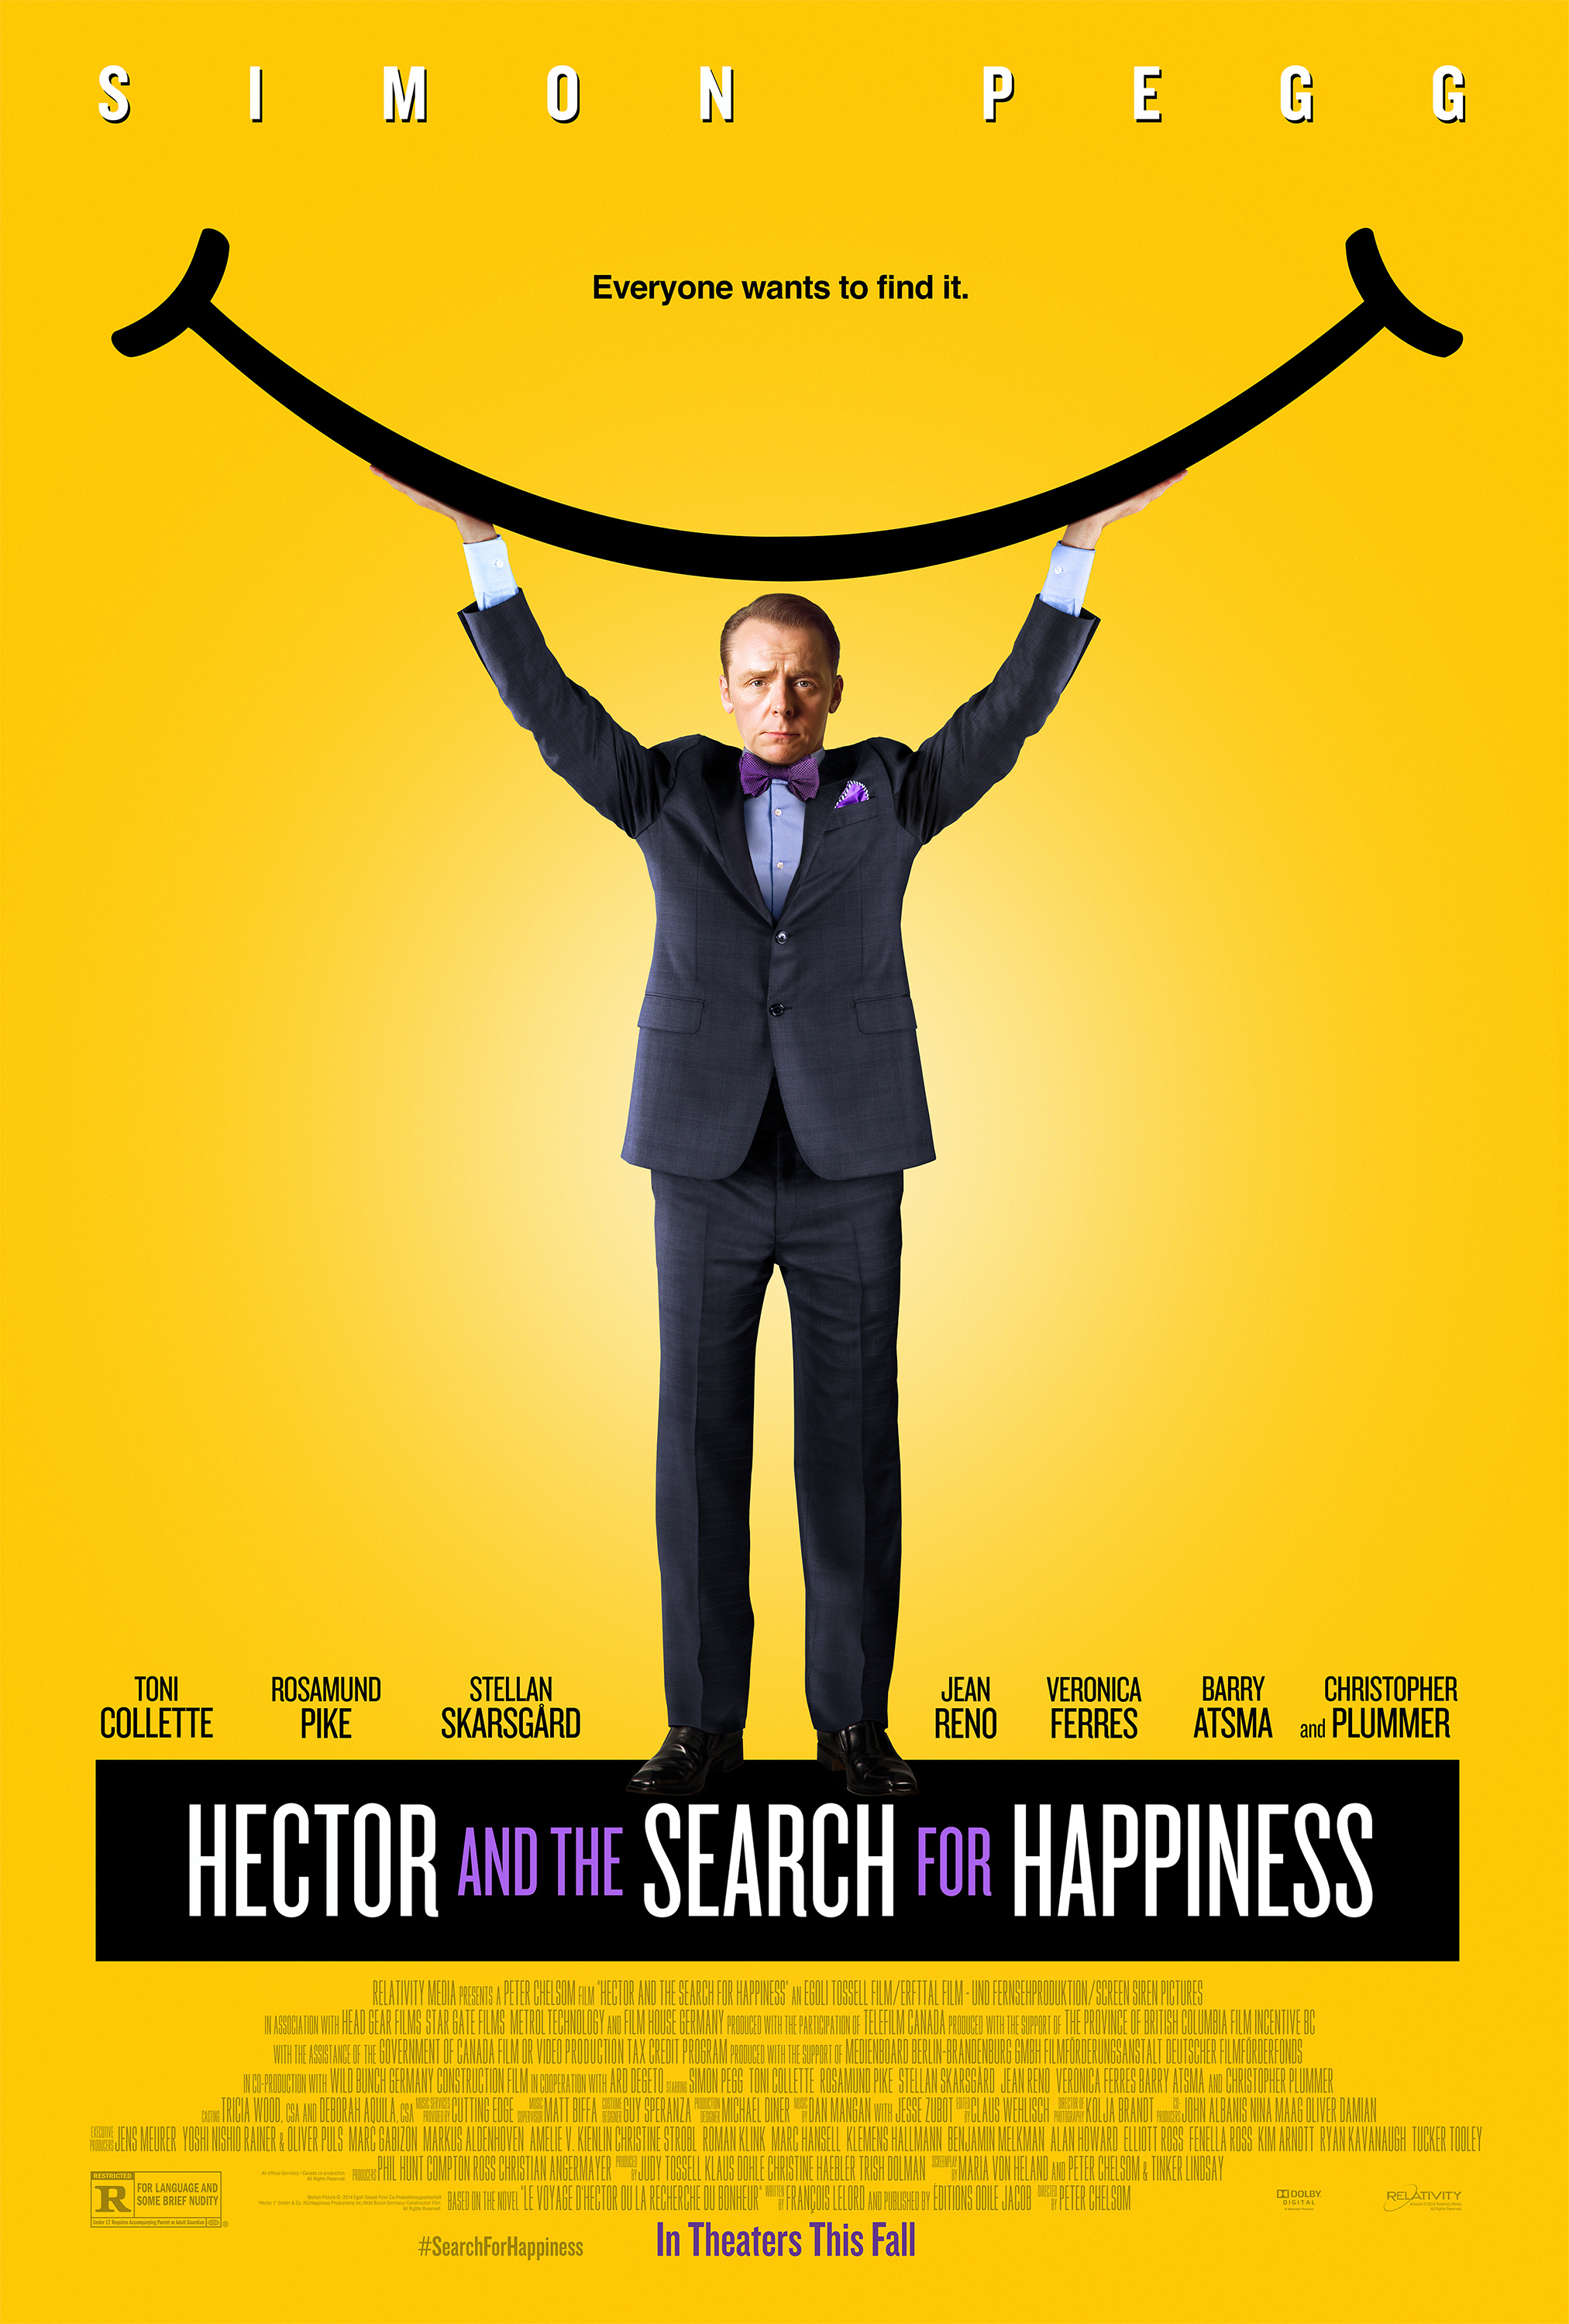 _**Hector and the Search for Happiness**_